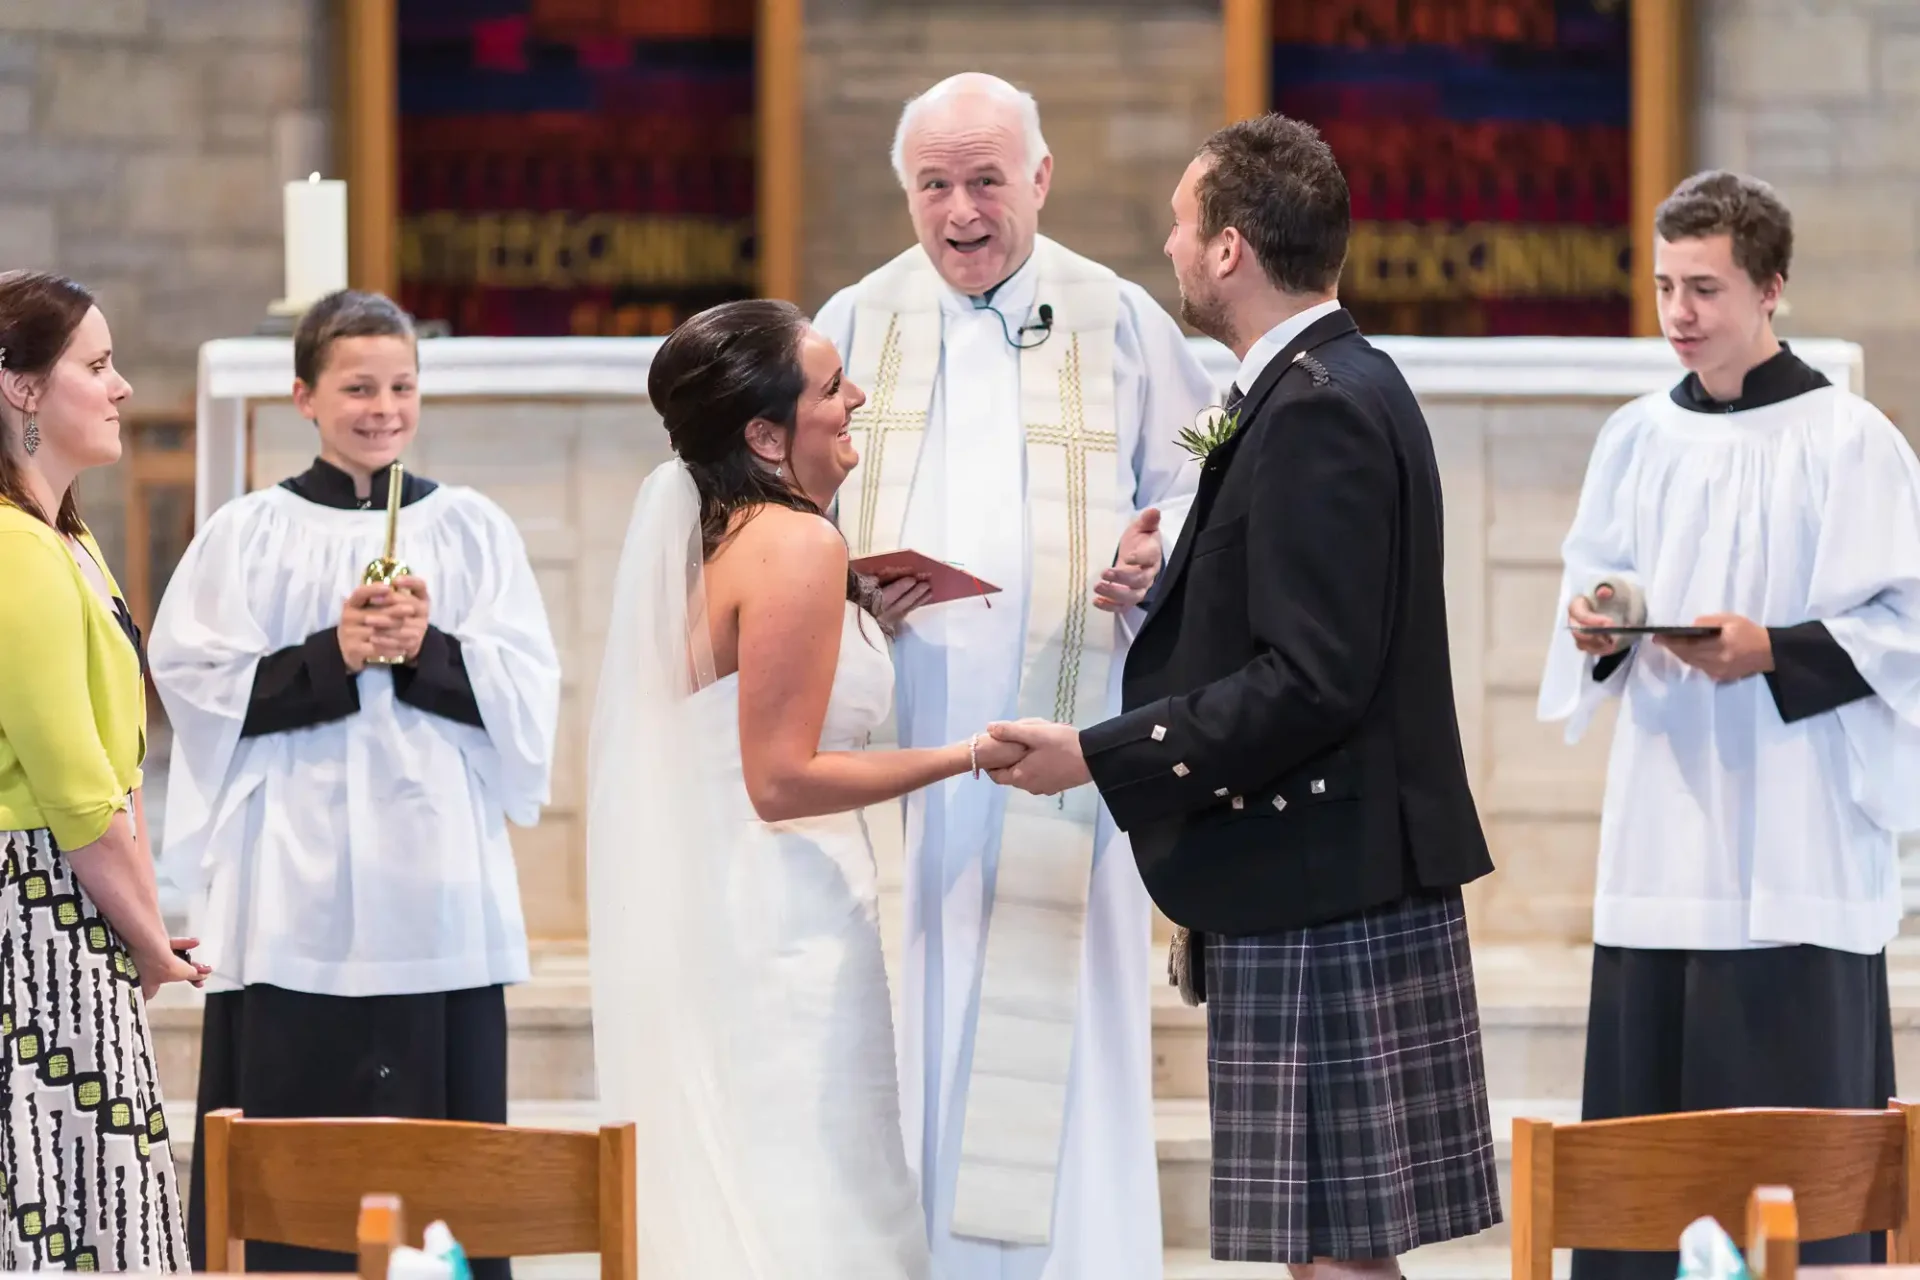 A bride and groom exchange vows in a church, officiated by a priest, with two attendants in white robes to the side.